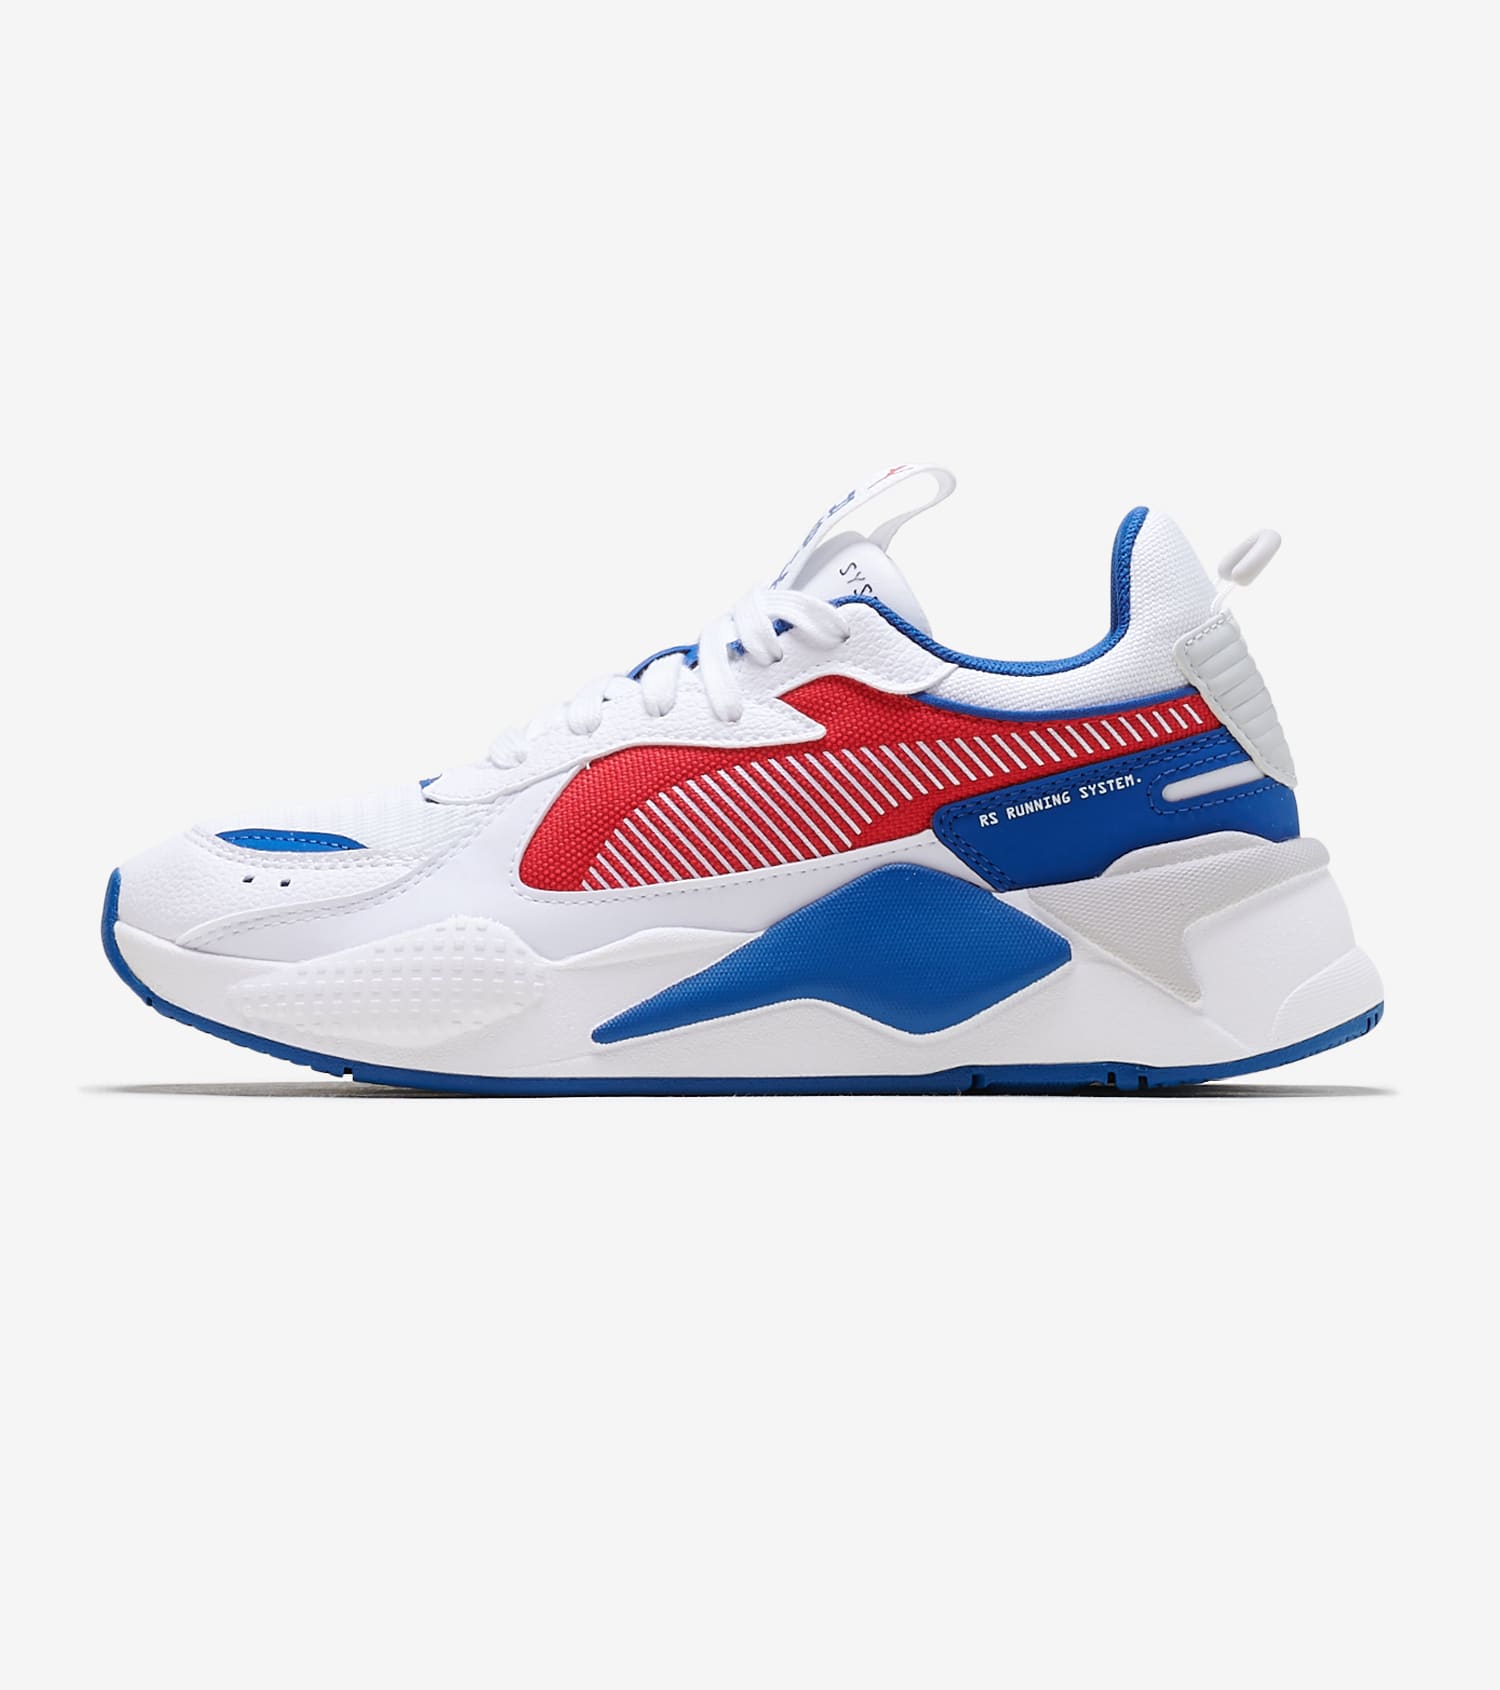 red white and blue puma